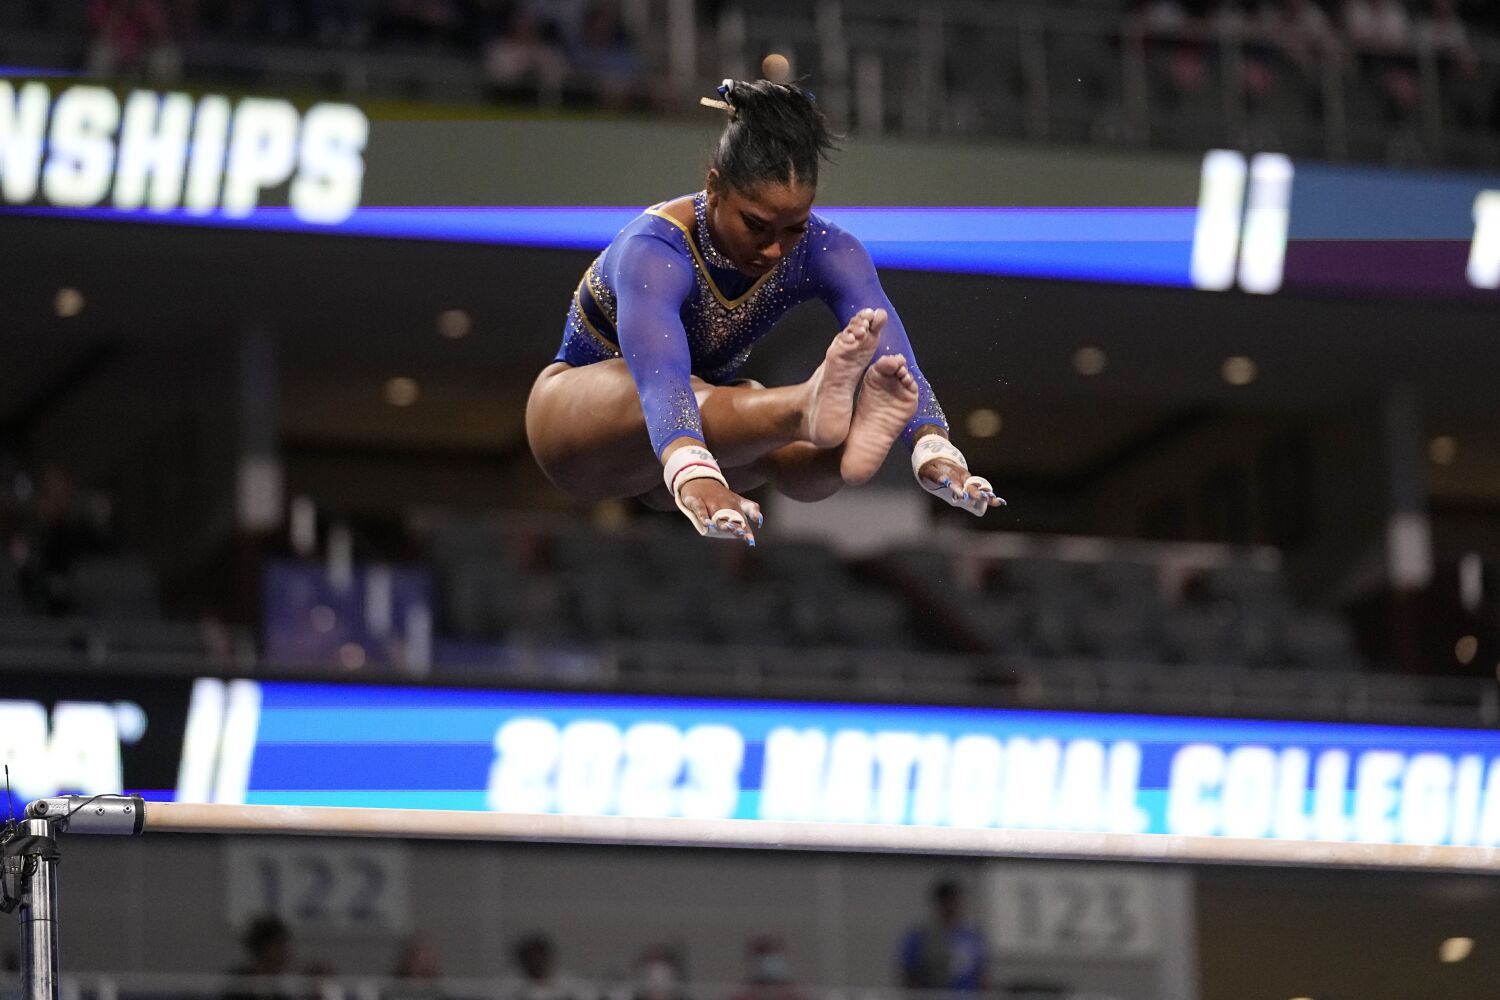 Jordan Chiles wins two titles but UCLA fails to reach NCAA championship final